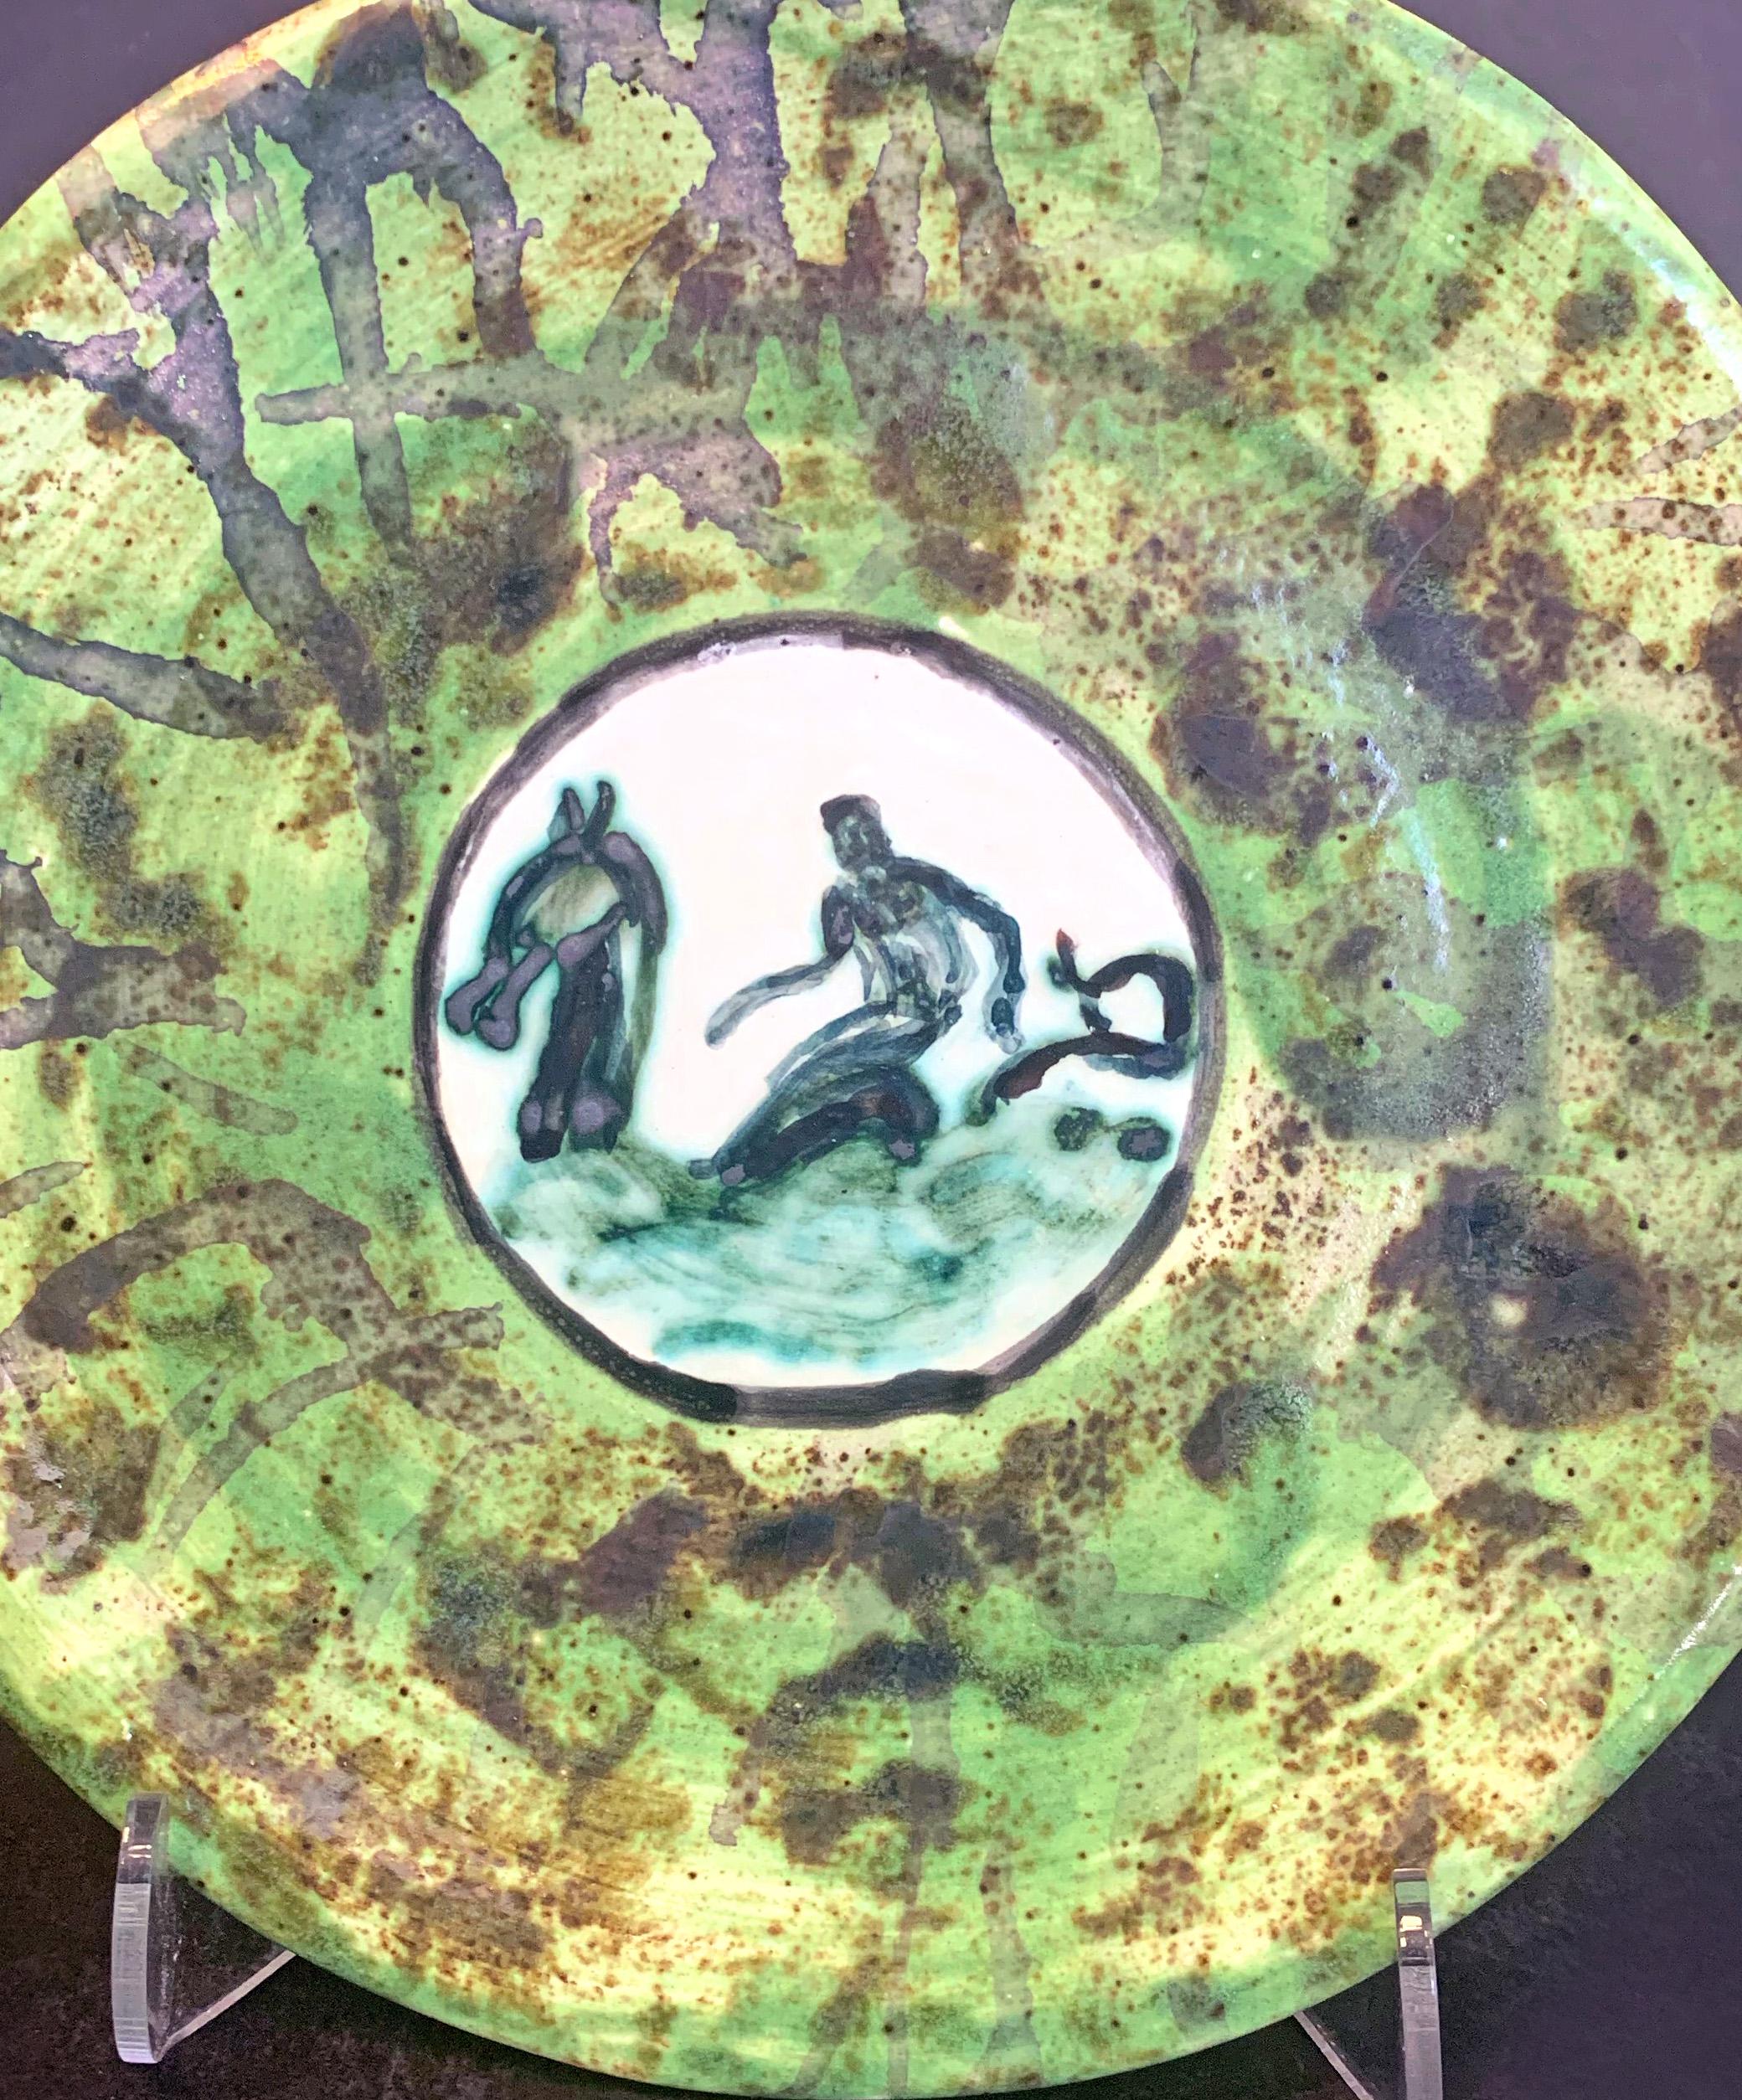 A superb example of Jean Mayodon's fascination with mythological figures, especially gods and goddesses cavorting in the sea, this fine Art Deco plate depicts Neptune riding a sea dragon or hippocampus in the central medallion. The outer border of